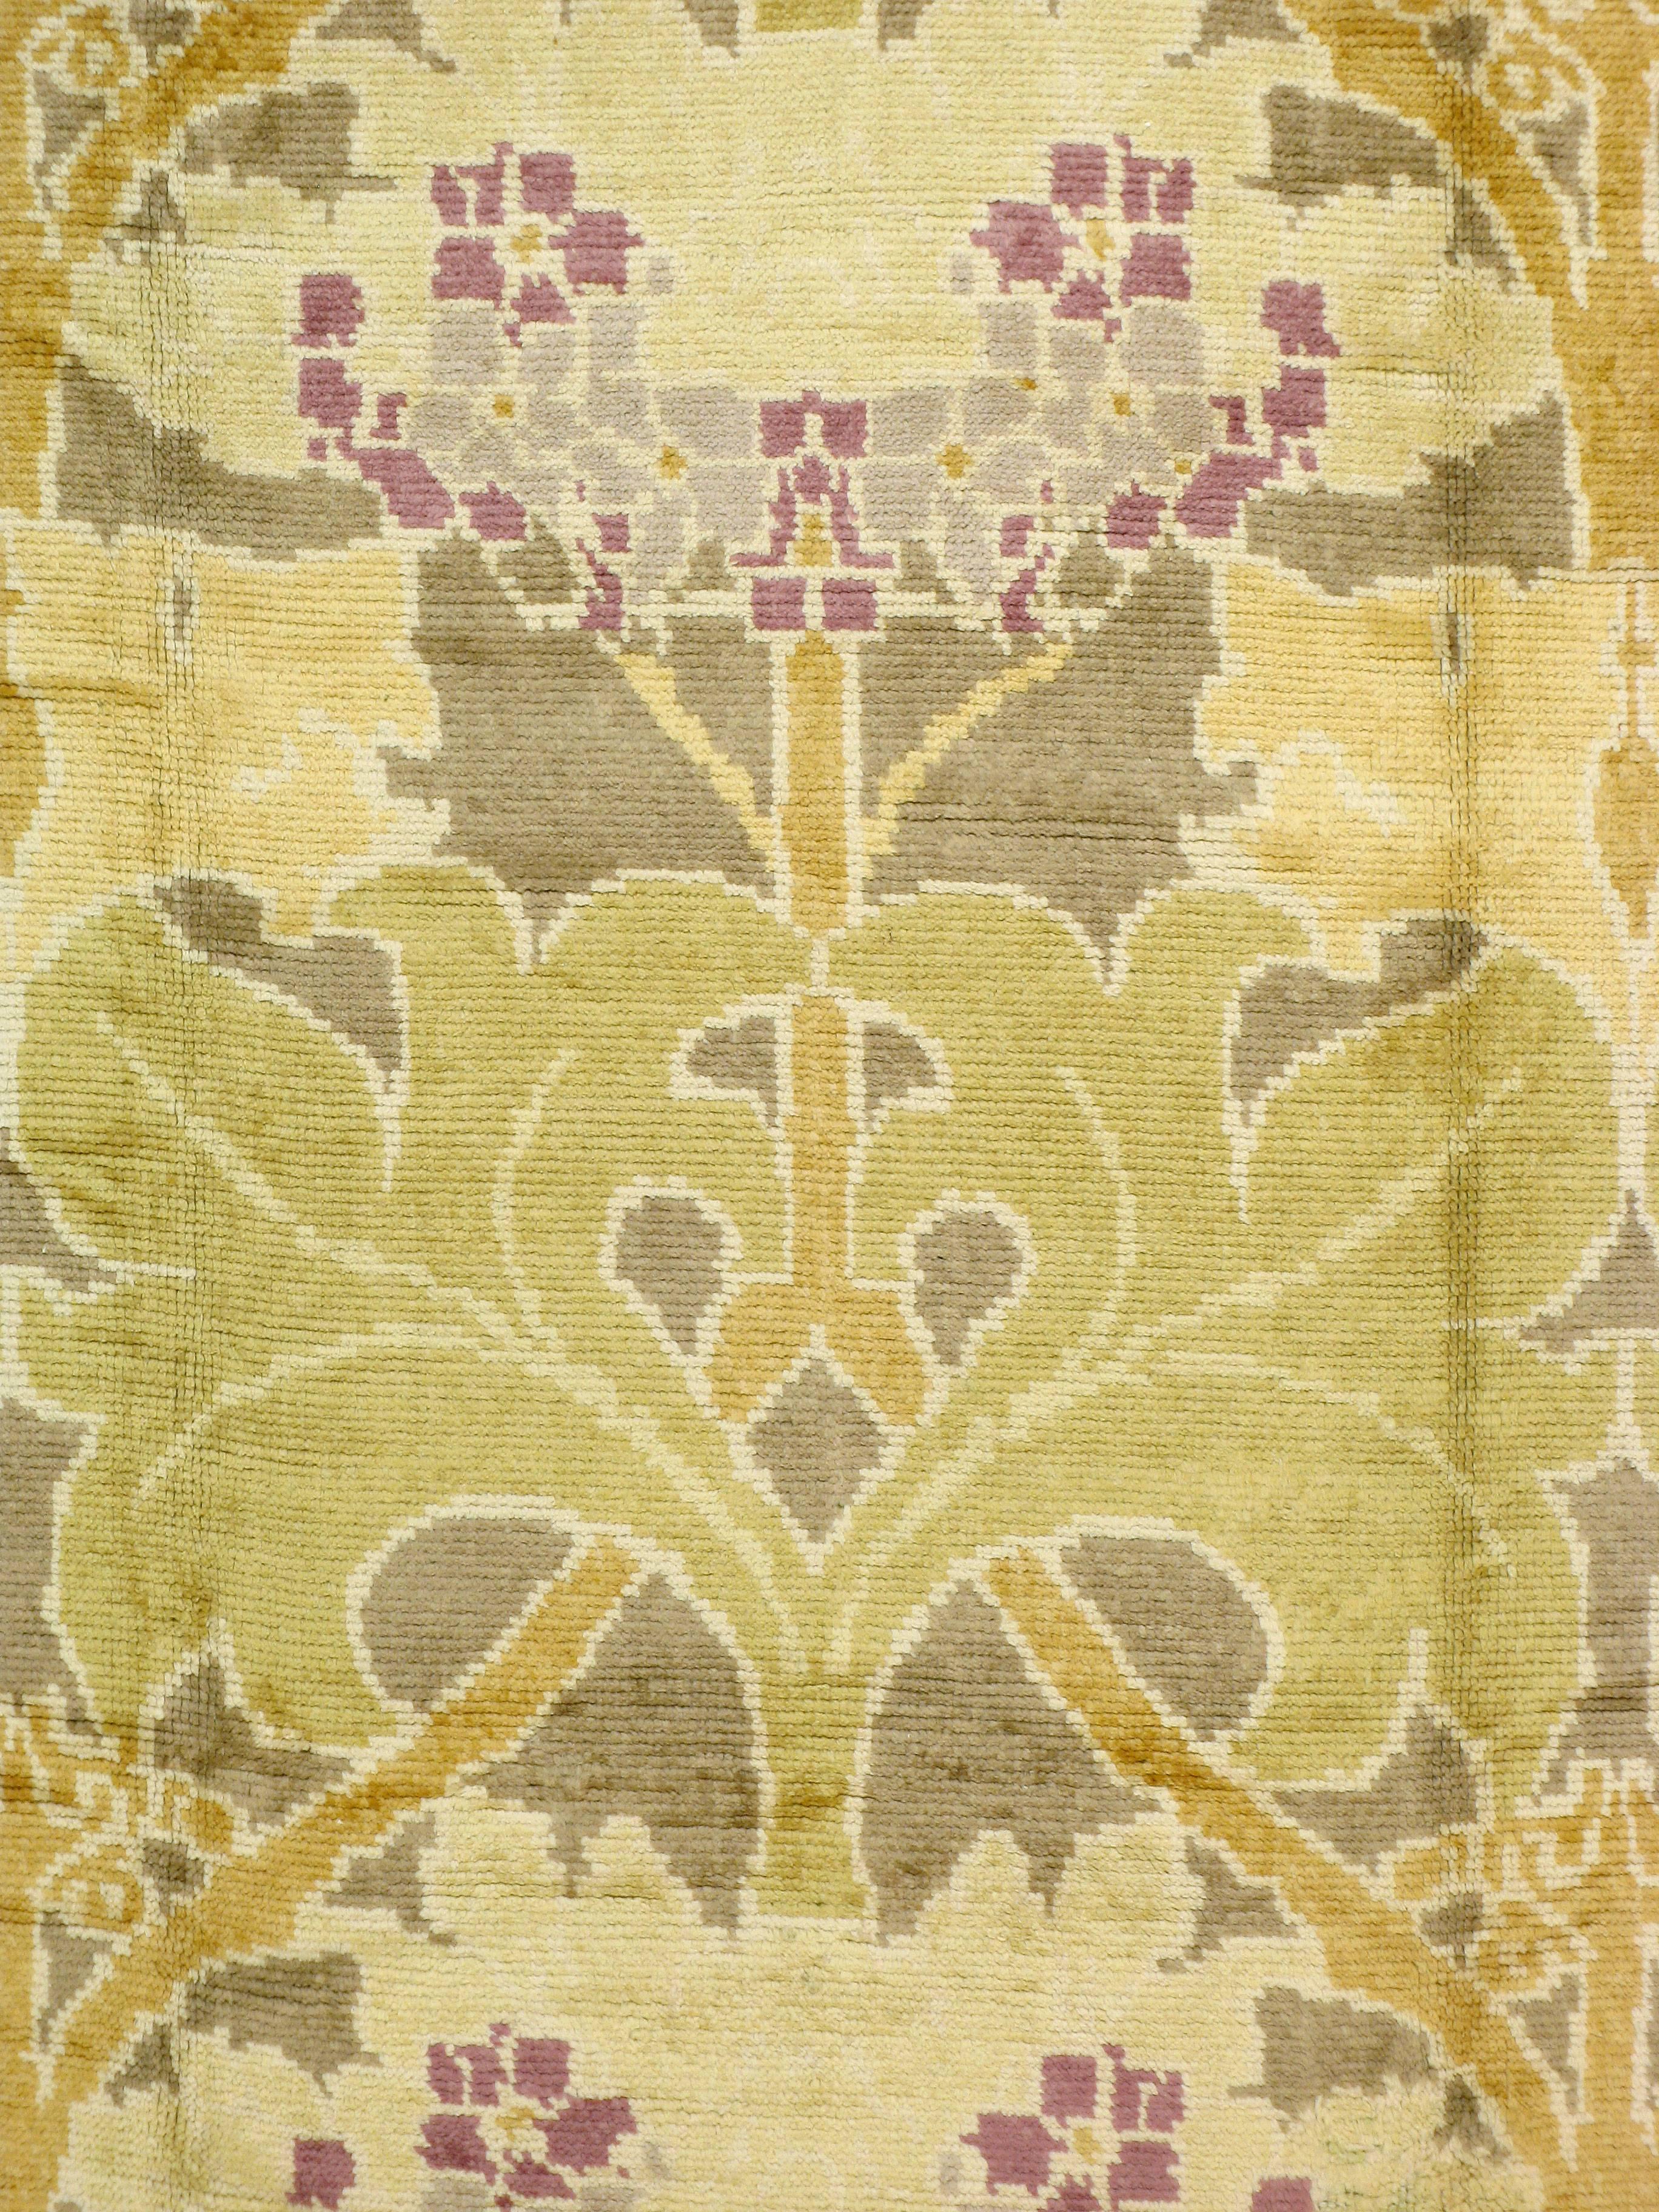 A vintage English Donegal carpet in the style of Donnemara created by architecturally trained designer C.F.A Voysey whom was influenced by a fusion of the Arts and Craft Movement and Art Nouveau, and William Morris designs. Donnemara is considered